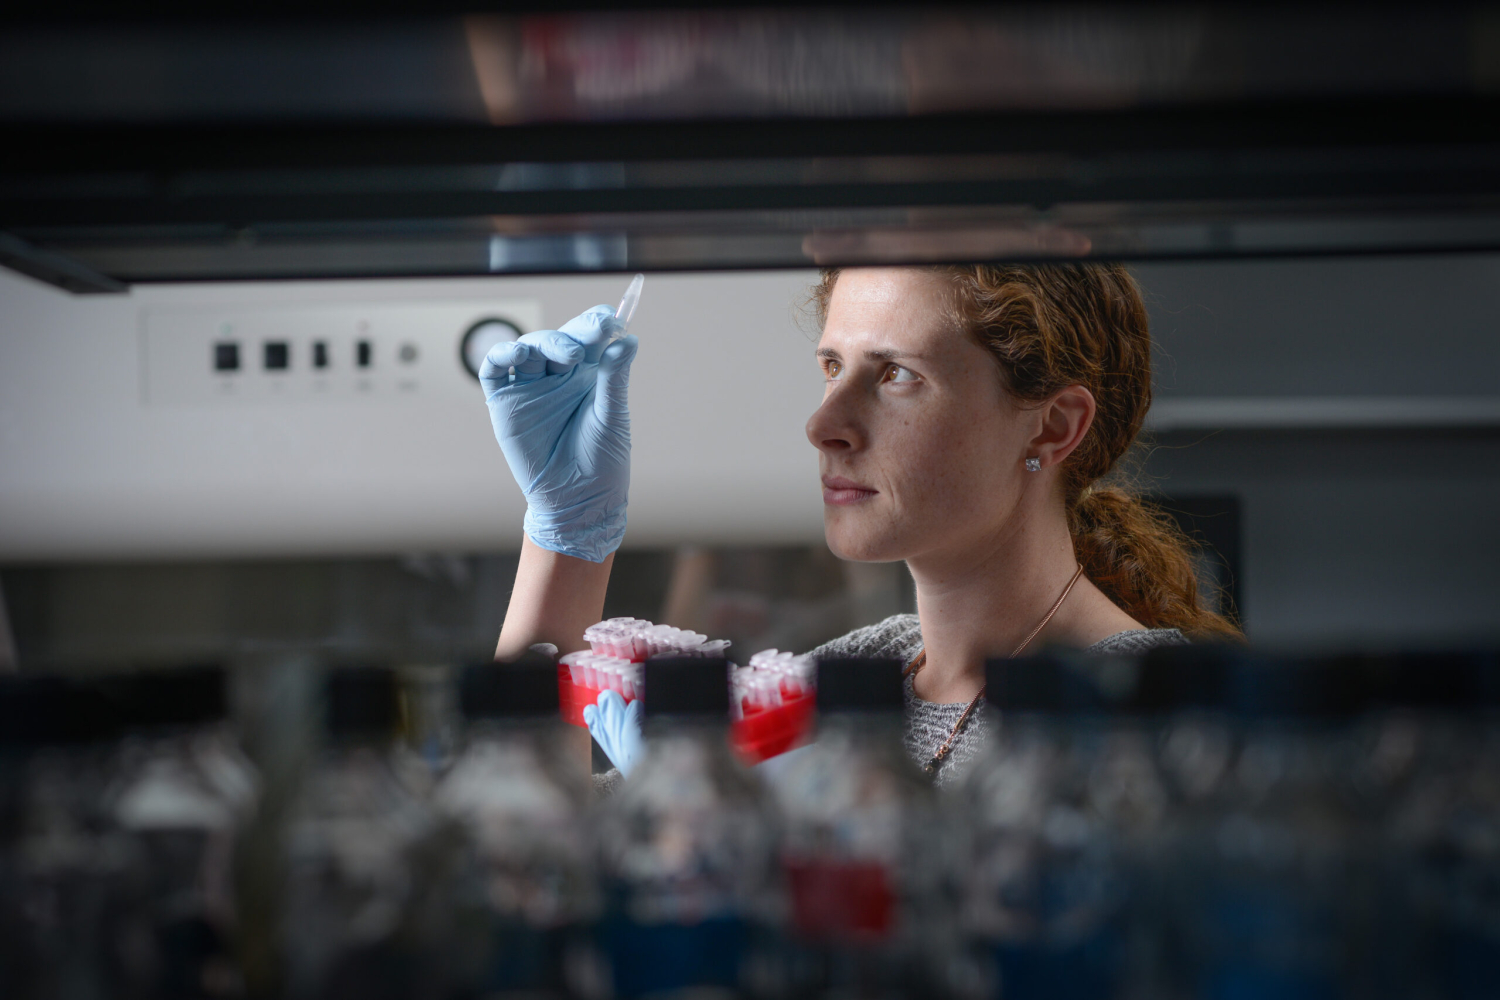 Dr. Kelly Meiklejohn, a female scientist with curly hair pulled back in a ponytail, examines a vial in a lab.